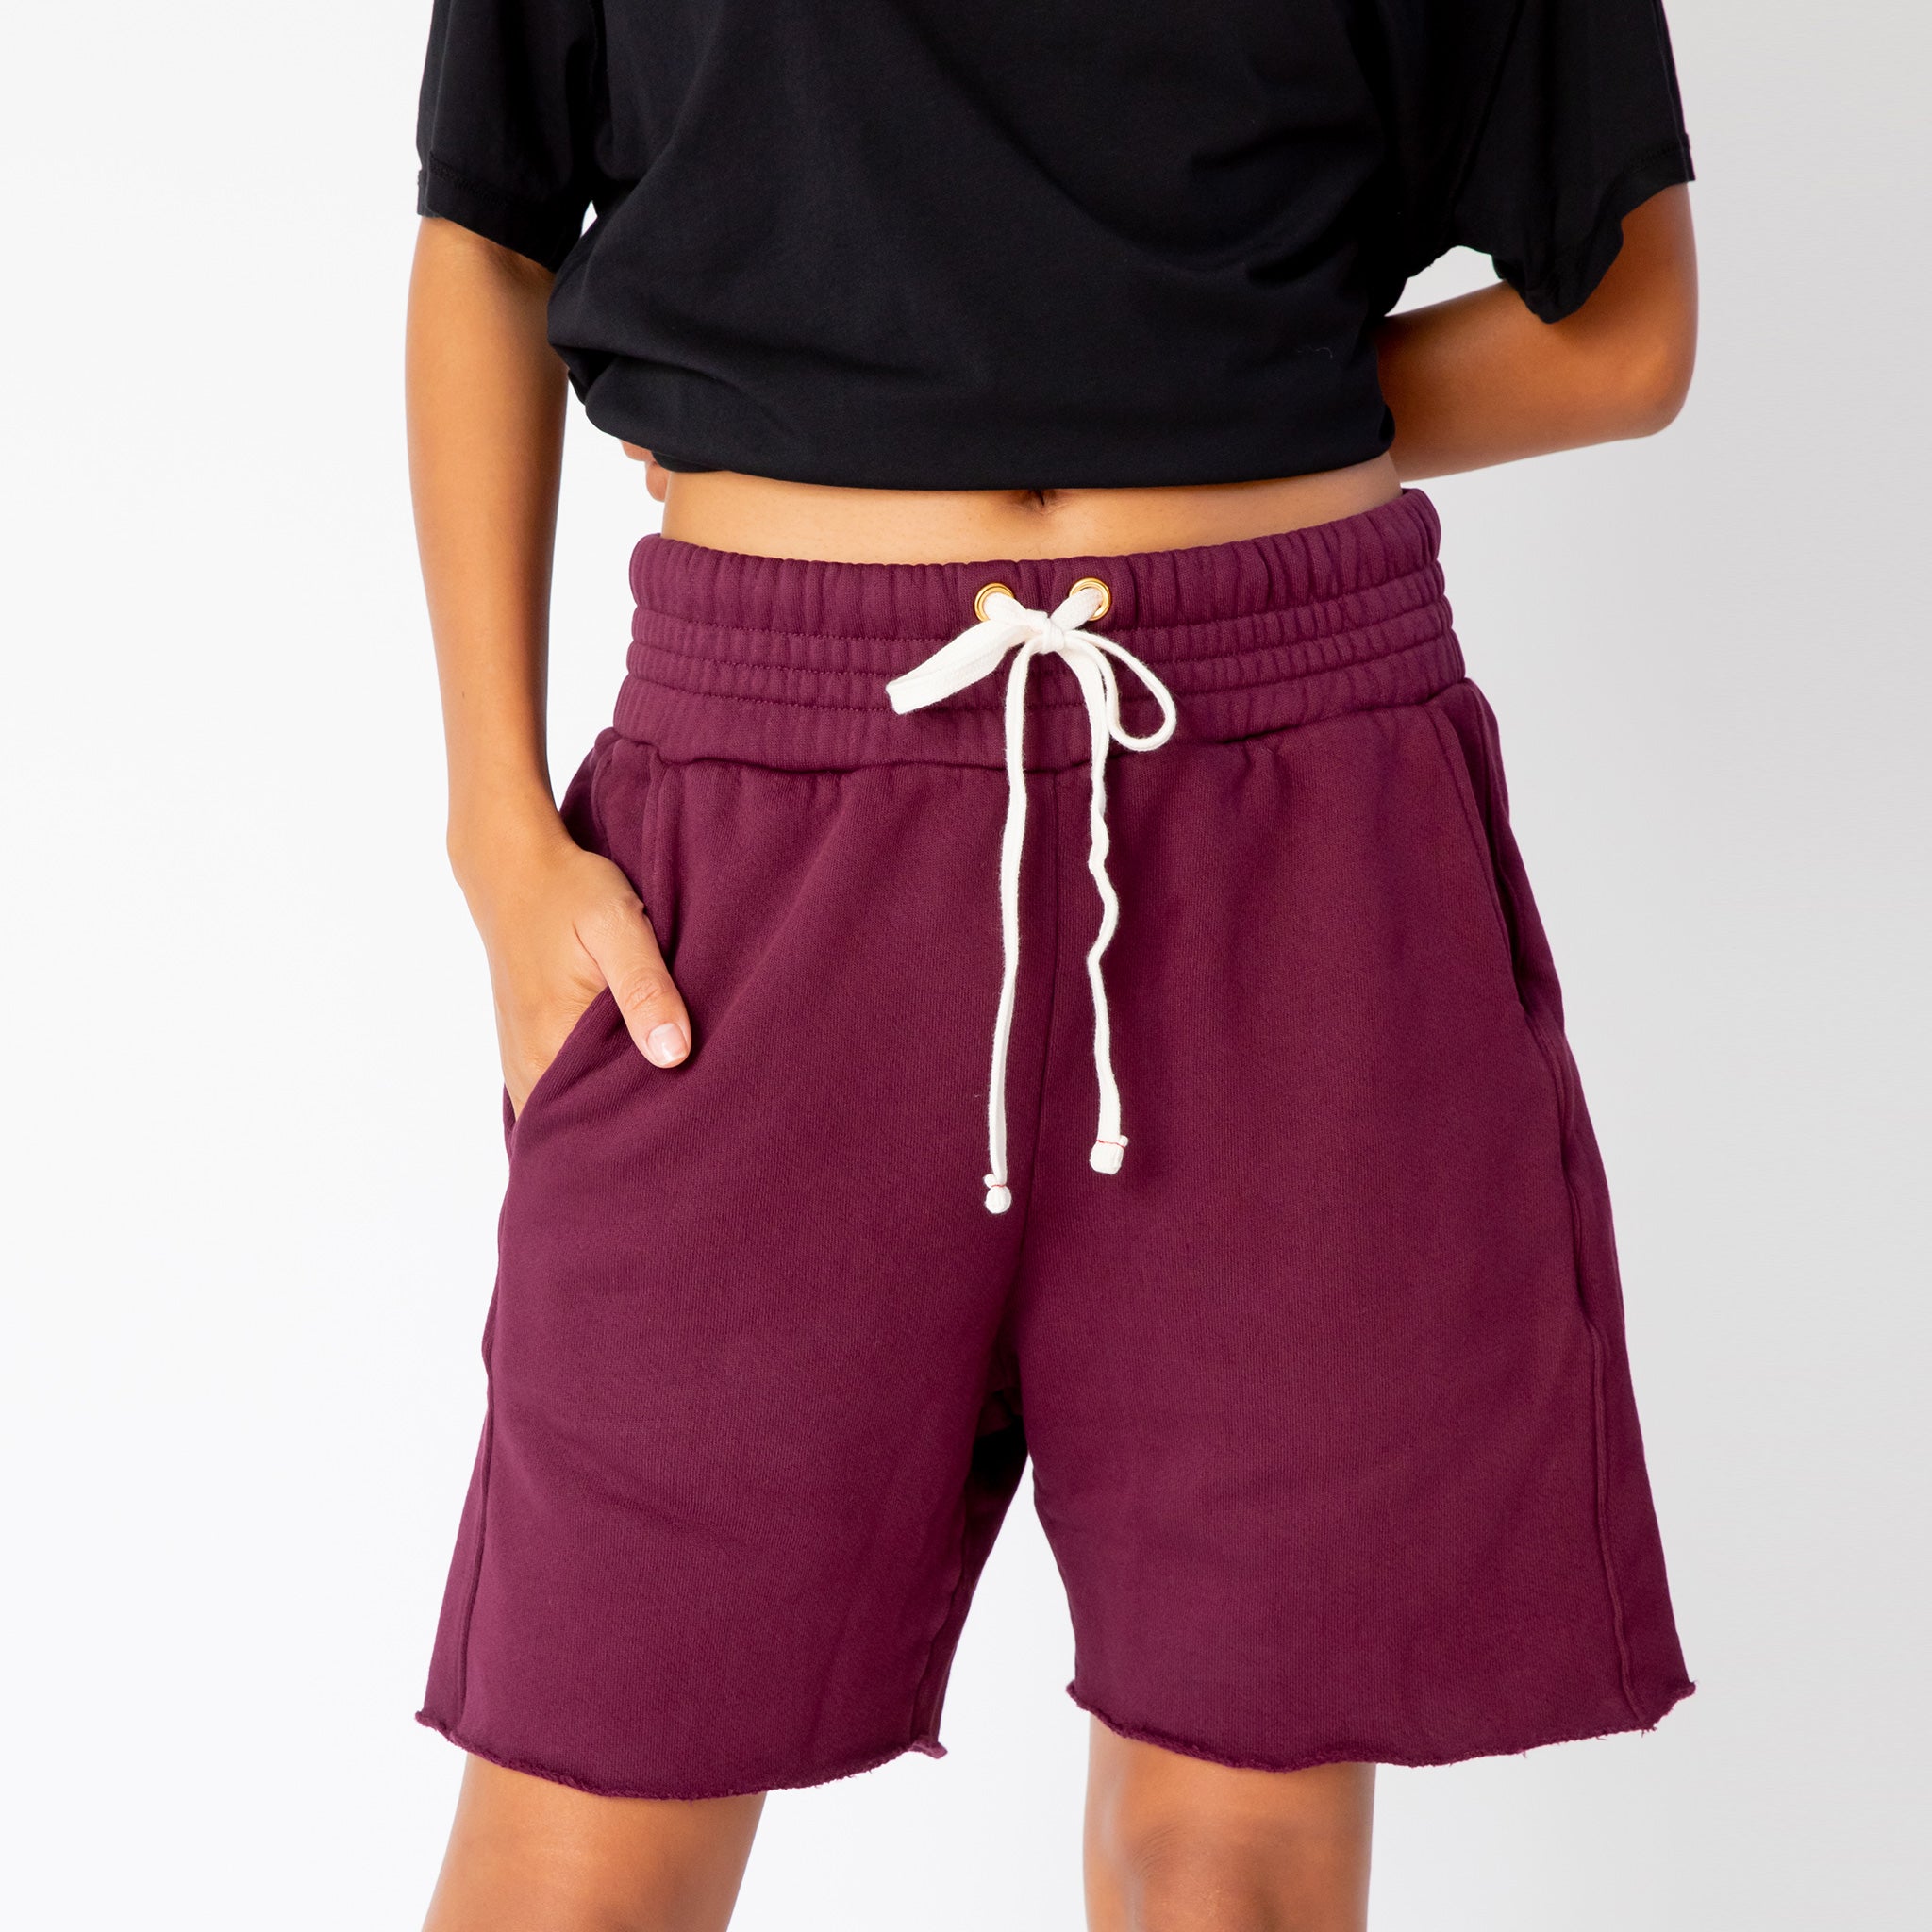 A model wears the merlot-red pigment dyed Yacht sweat shorts by Les Tien, paired with a black t-shirt - front detailed view of white drawstrings and wide elastic waist band.